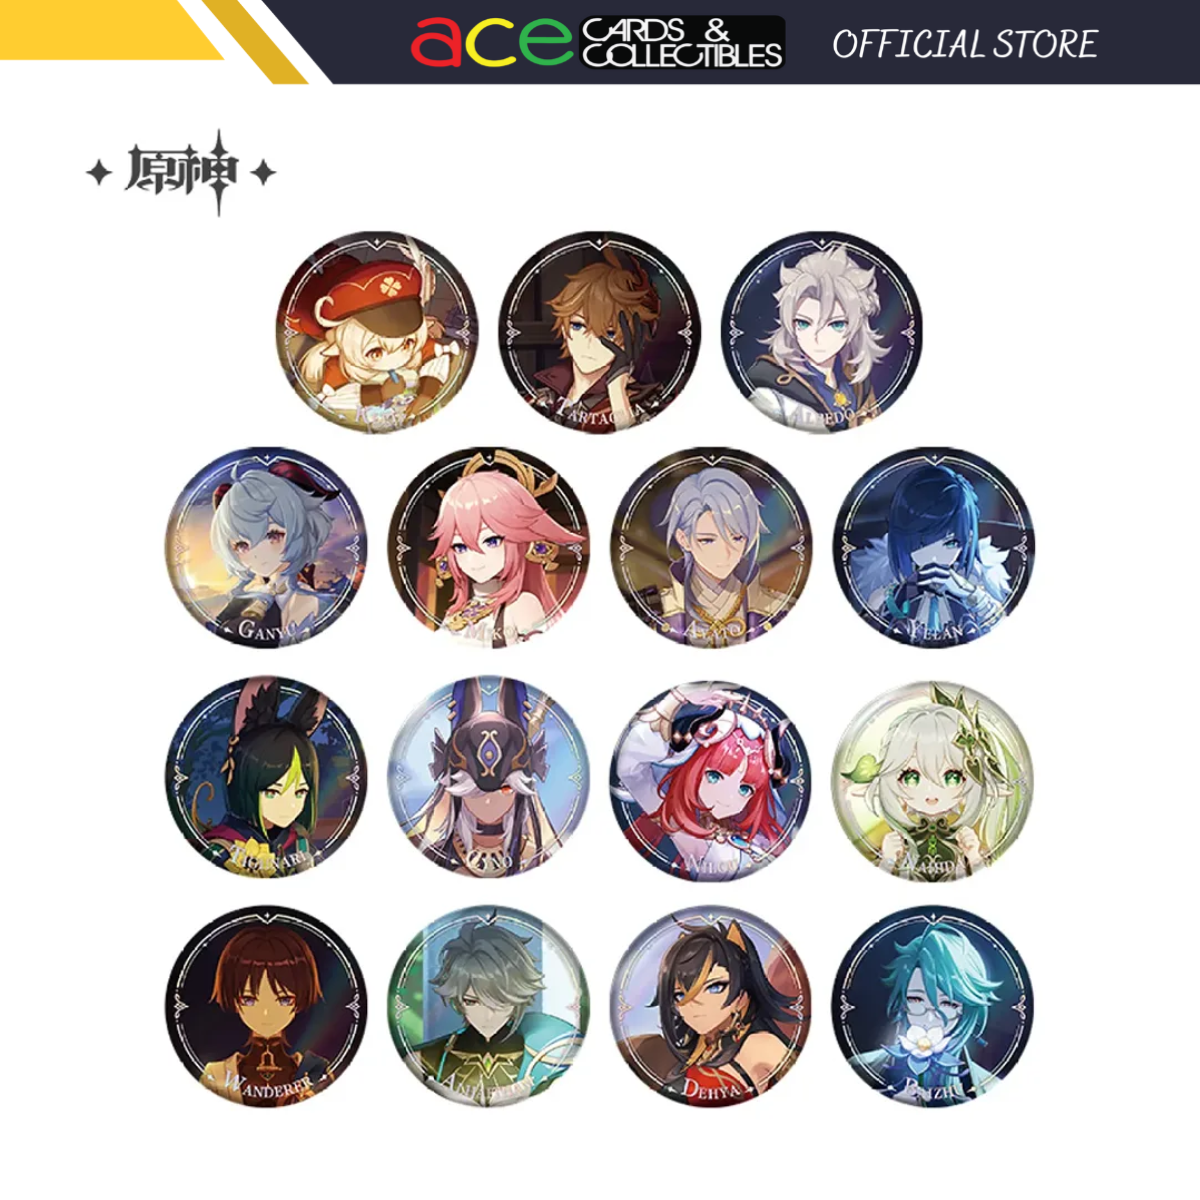 miHoYo Genshin Impact Character PV Badge-Klee-miHoYo-Ace Cards &amp; Collectibles